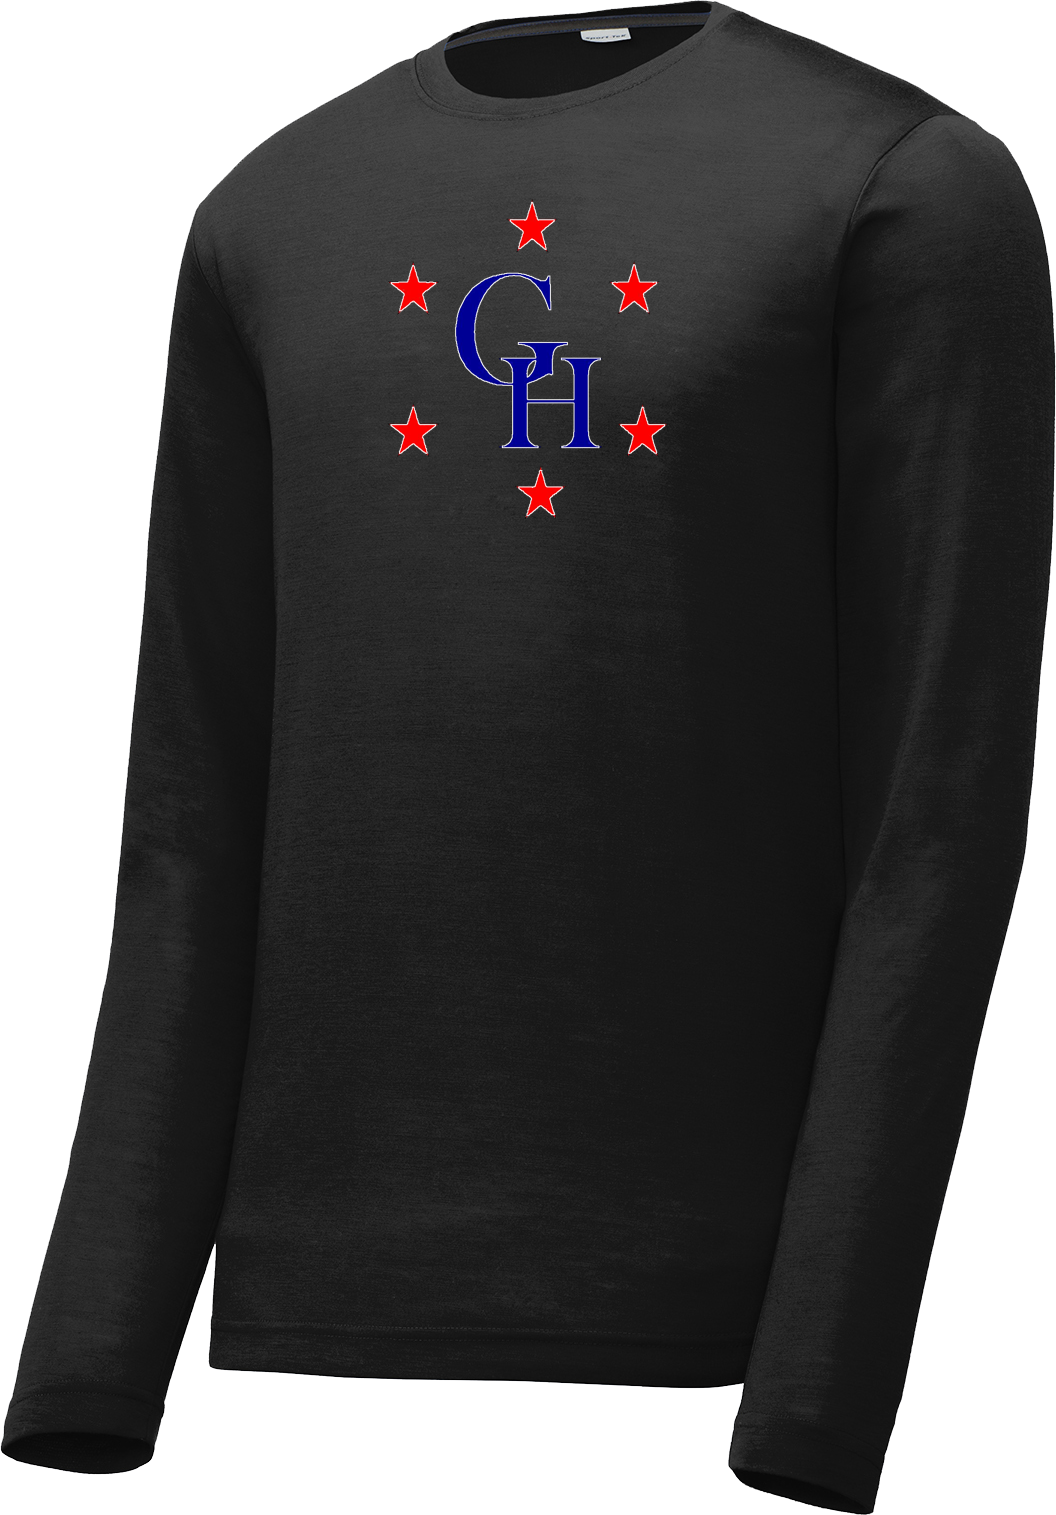 Greater Hollow Middle School Men's Black Long Sleeve CottonTouch Performance Shirt